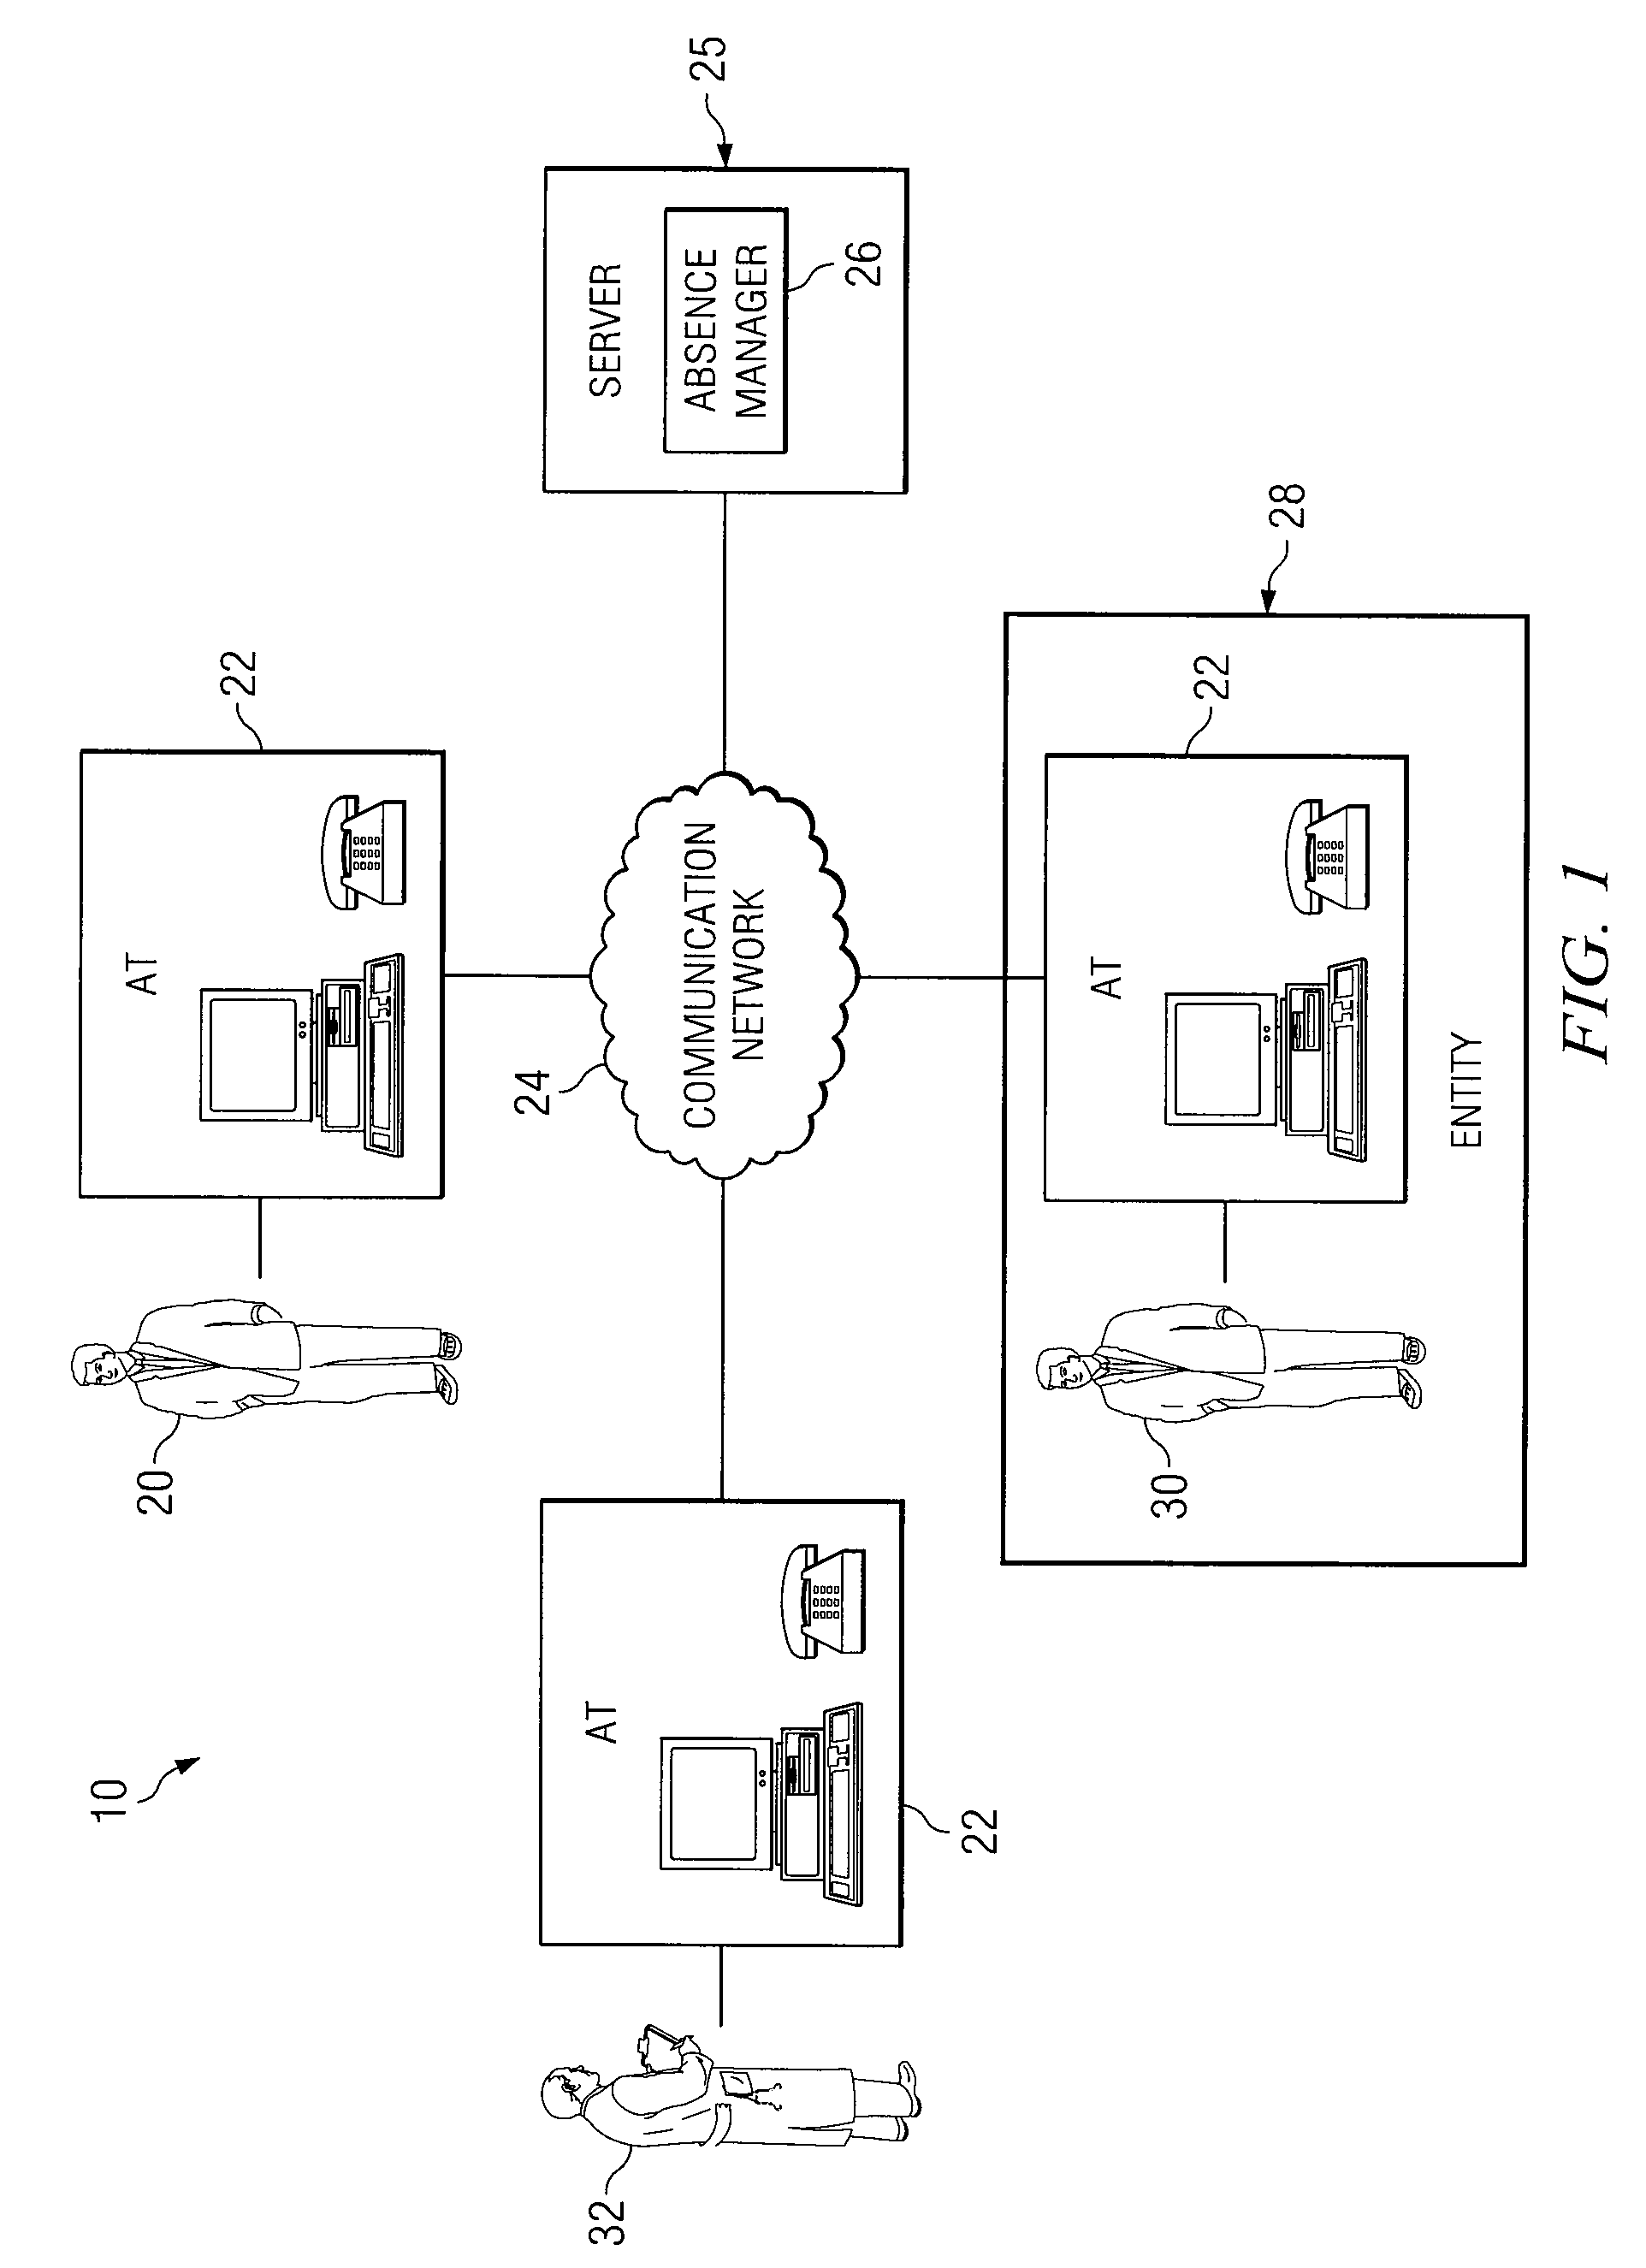 System and Method for Managing Absenteeism in an Employee Environment